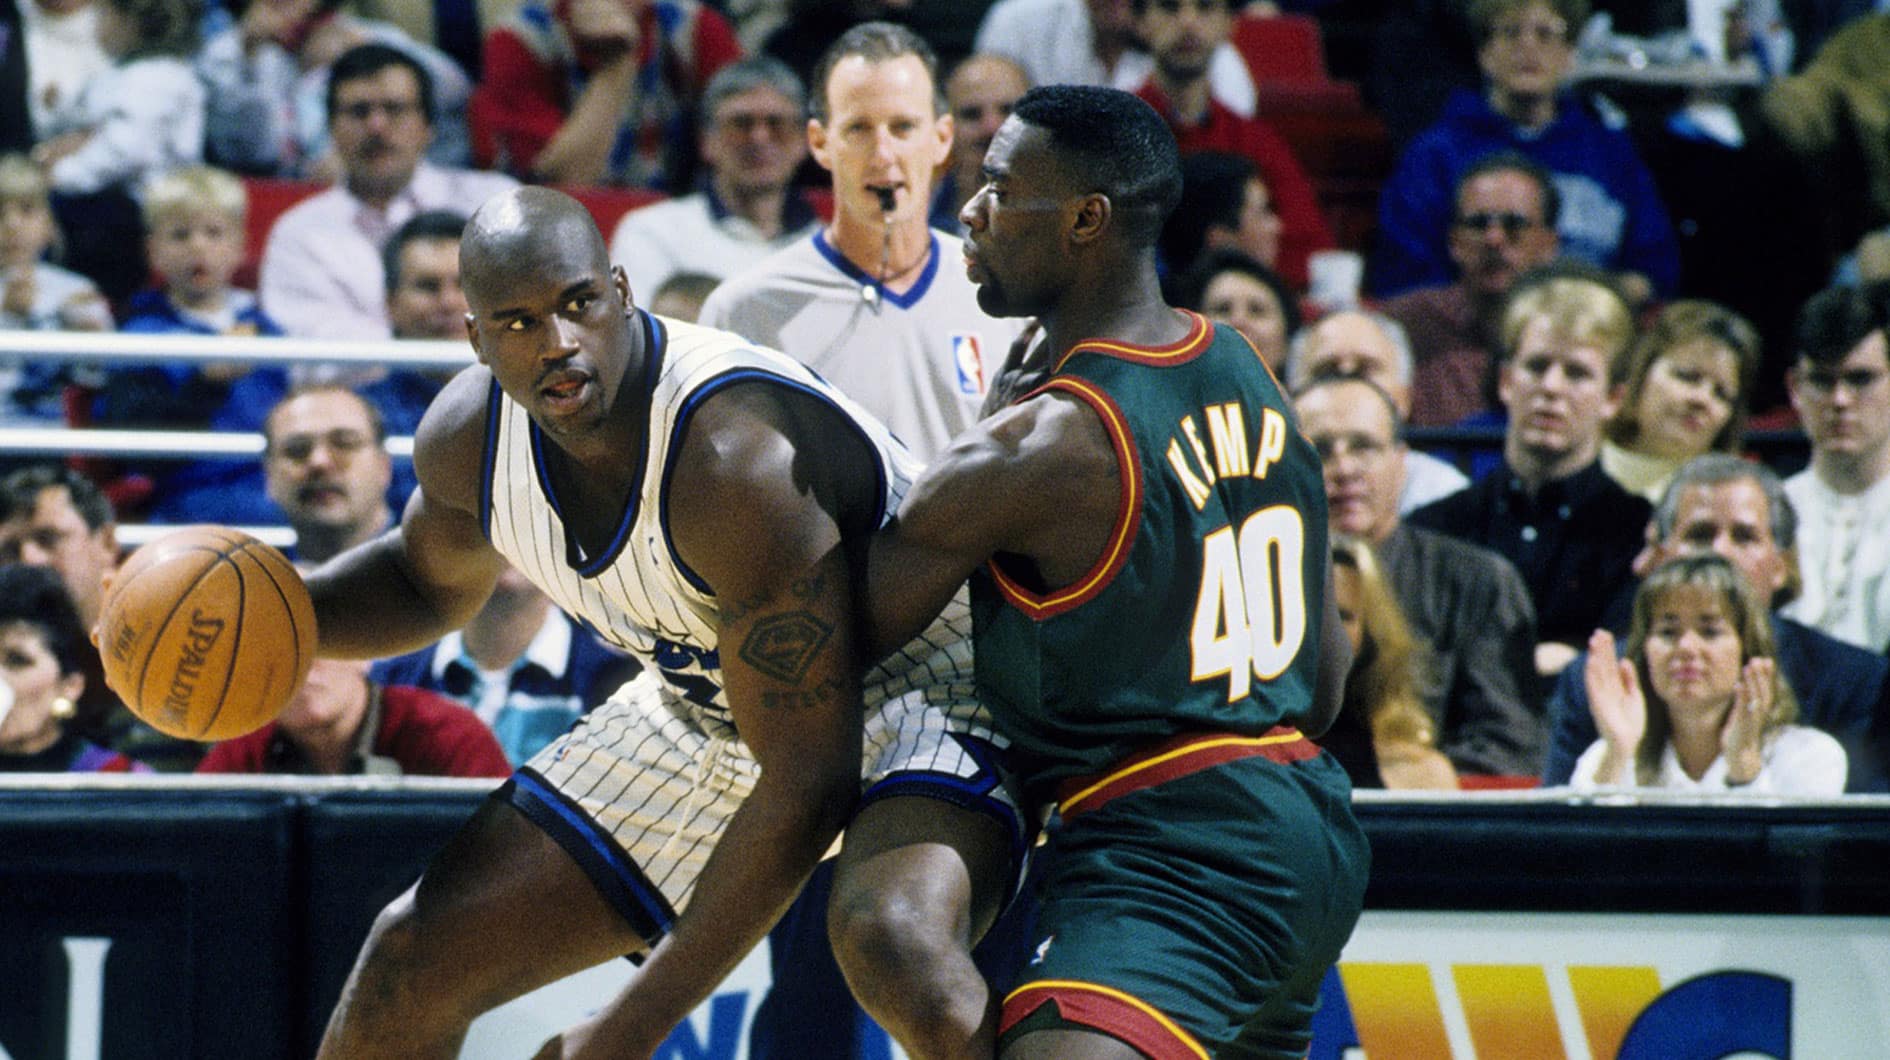 Orlando Magic center Shaquille O'Neal (32) in action against Seattle Supersonics center Shawn Kemp (40) at the Orlando Arena. Mandatory Credit: RVR Photos-USA TODAY Sports